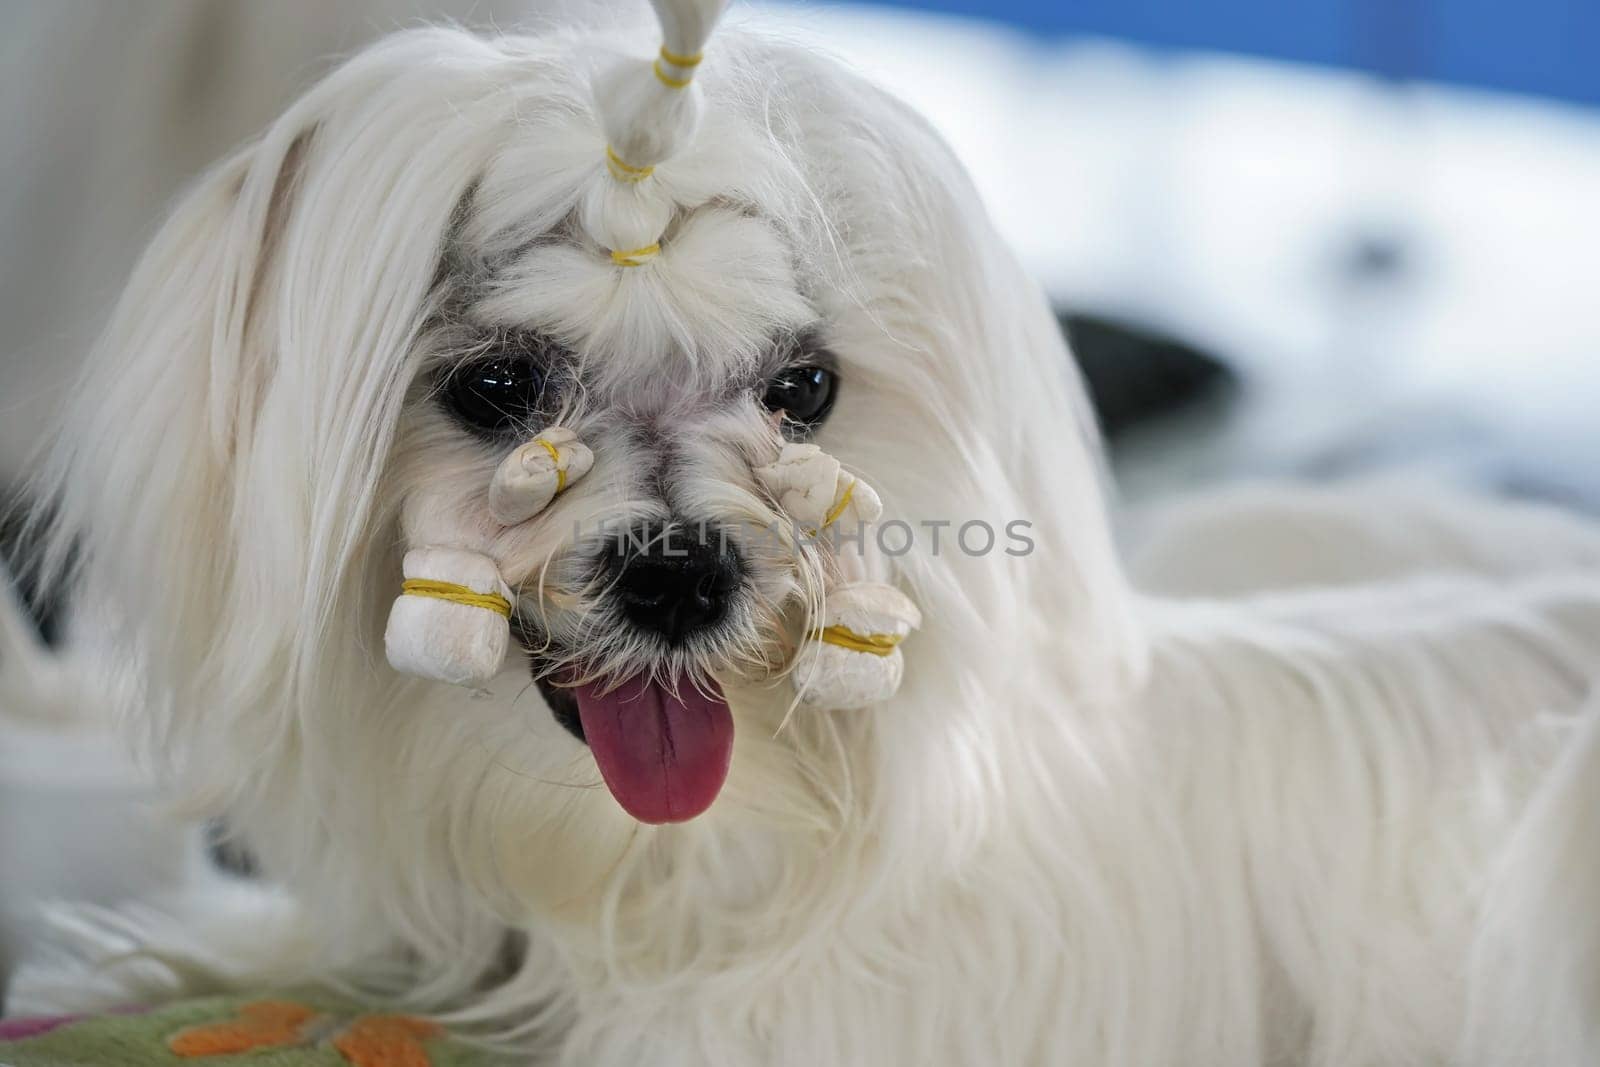 White Shihtzu dog getting groomed at canine contest, hair on face holding together with rubber bands by Ivanko